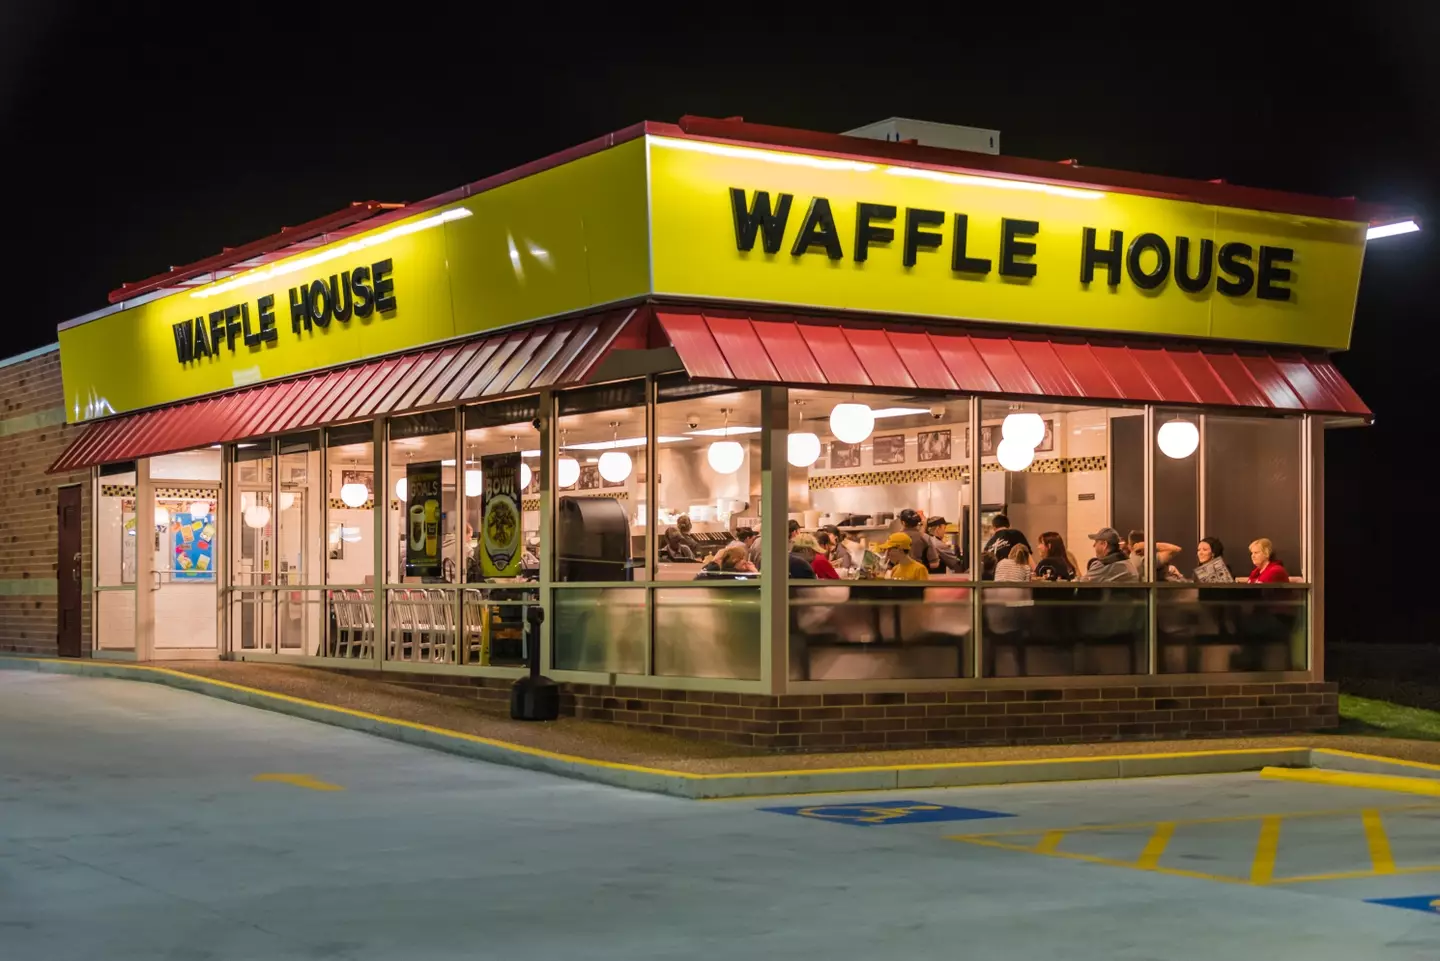 People have joked they will ditch their current job to work at Waffle House after finding out how much the waitress makes.